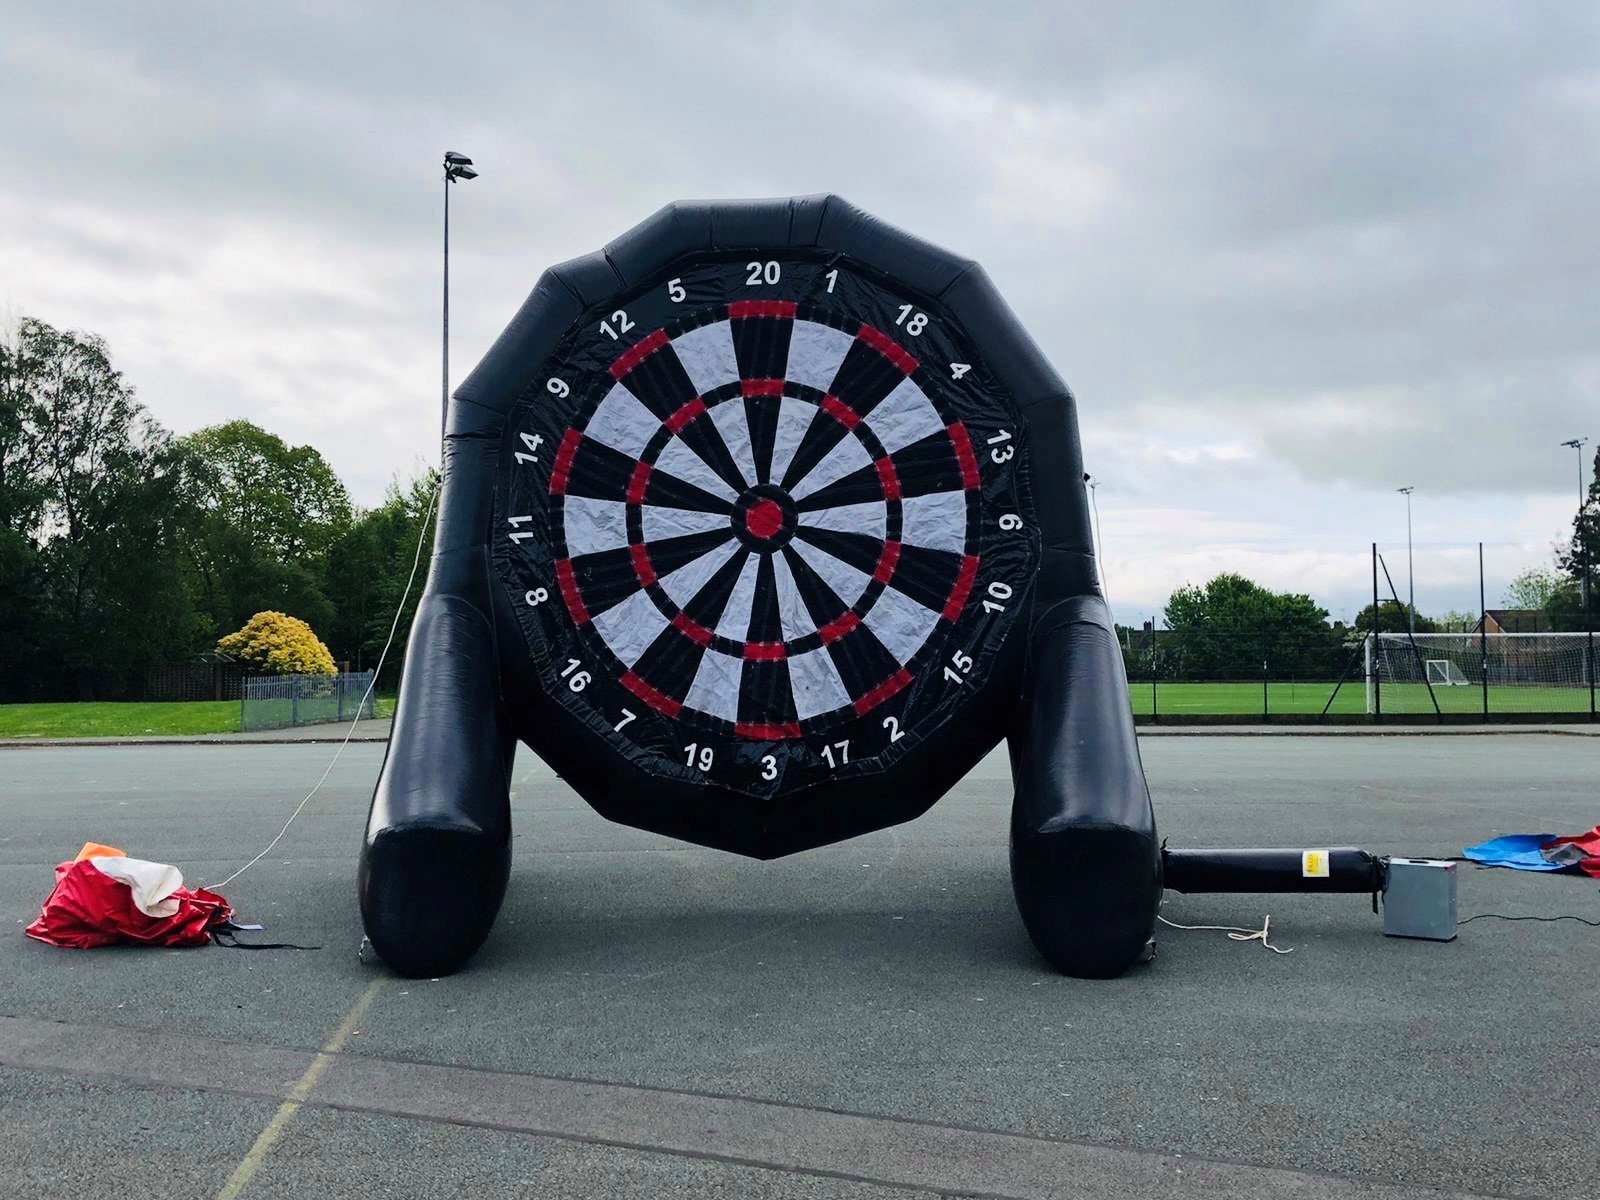 Inflatable darts fun at the Gwyn Evans Leisure & Activity Centre open day.